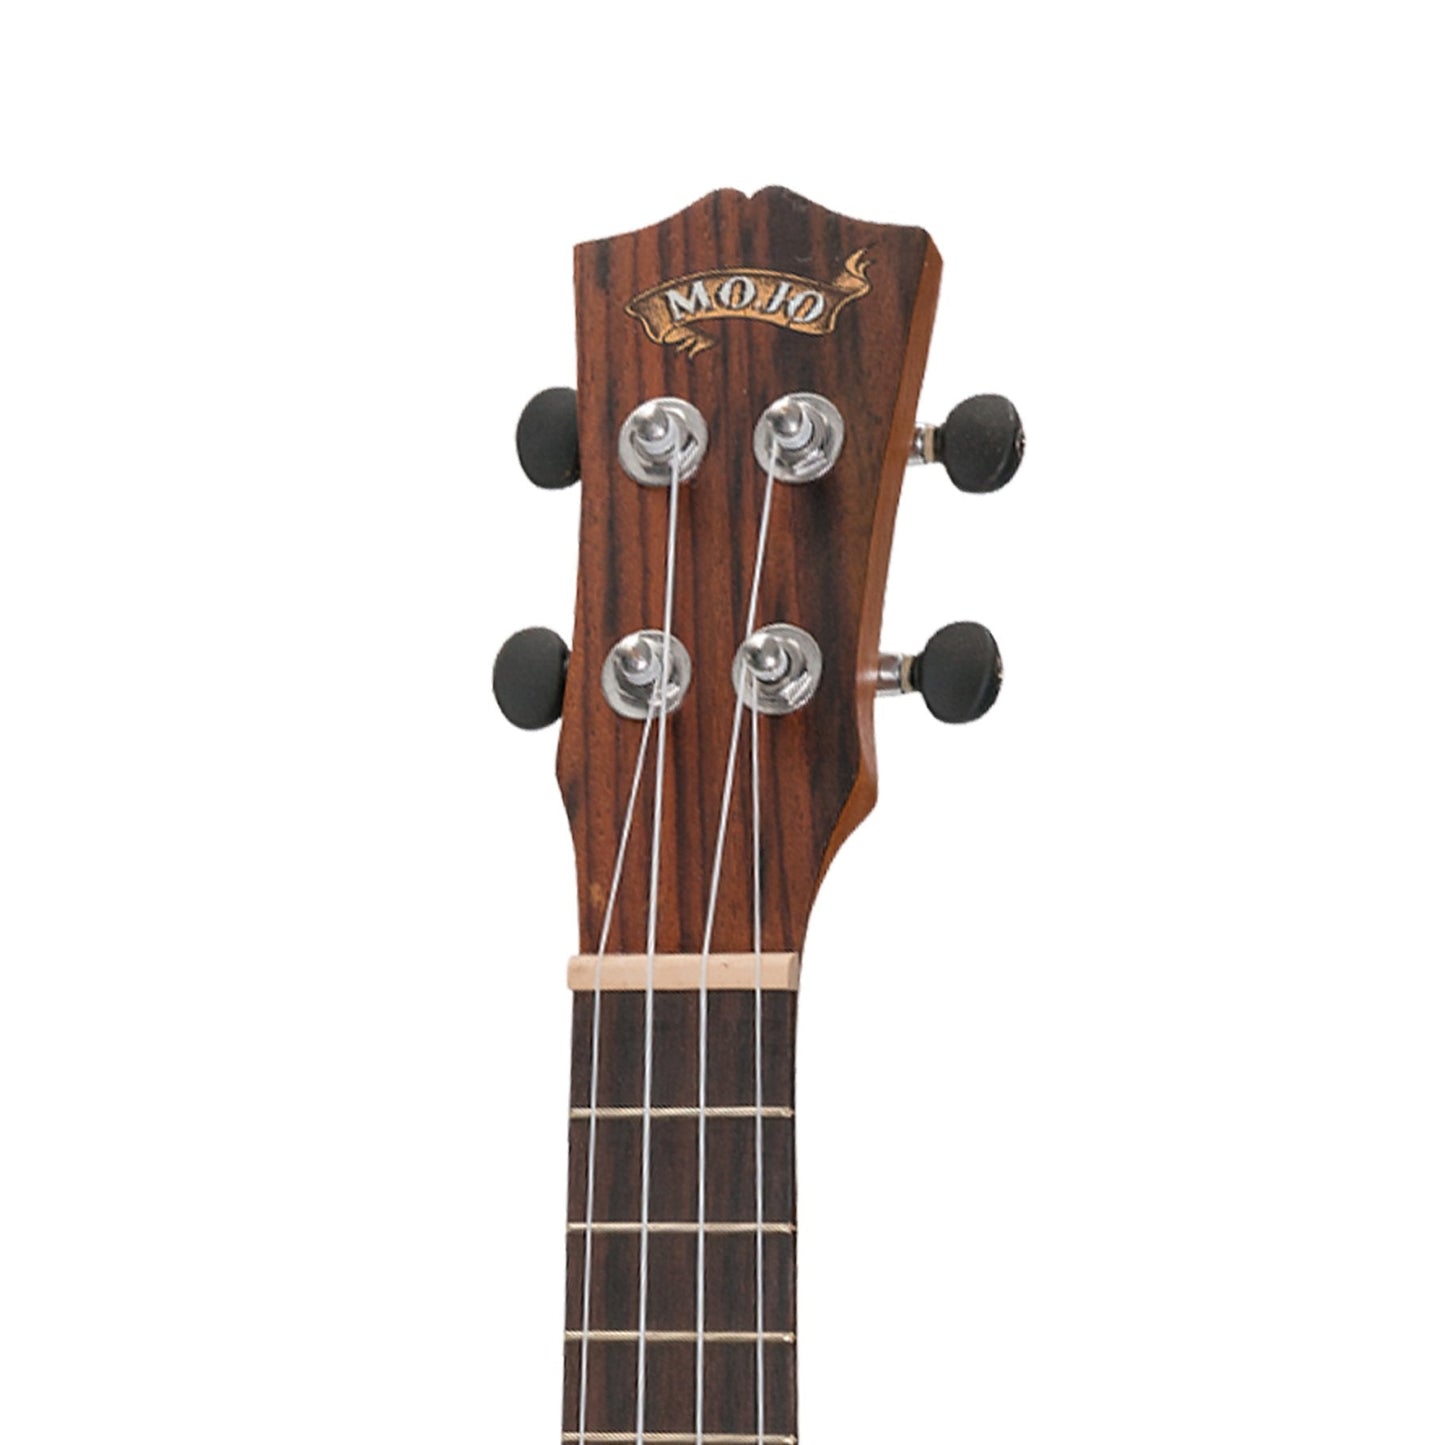 Mojo 'SZ40 Series' Spruce Top and Rosewood Back & Sides Electric Soprano Ukulele (Natural Satin)